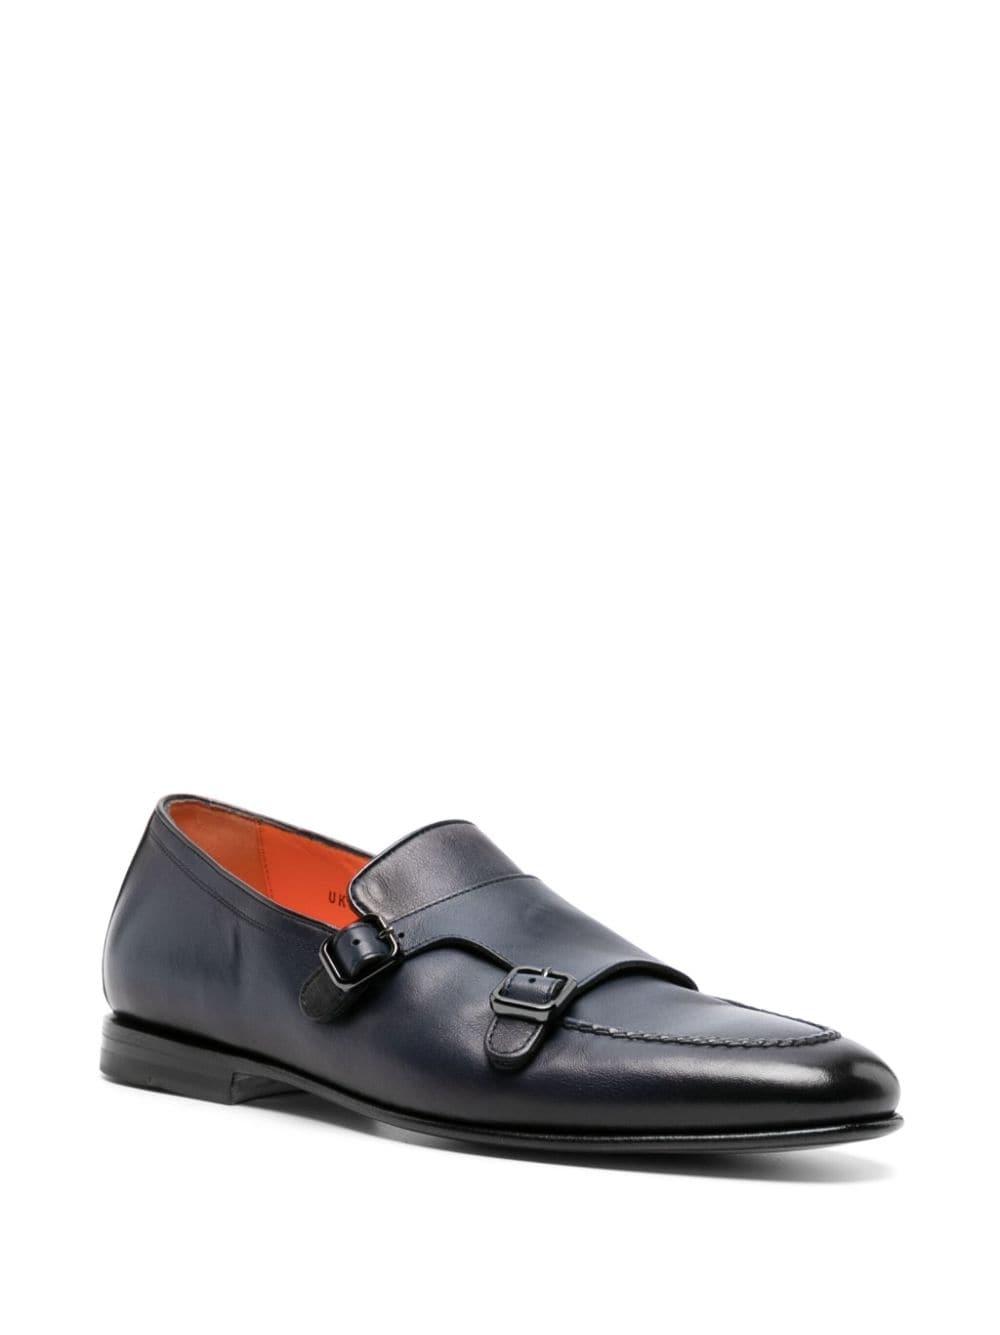 double-buckle leather monk shoes - 2